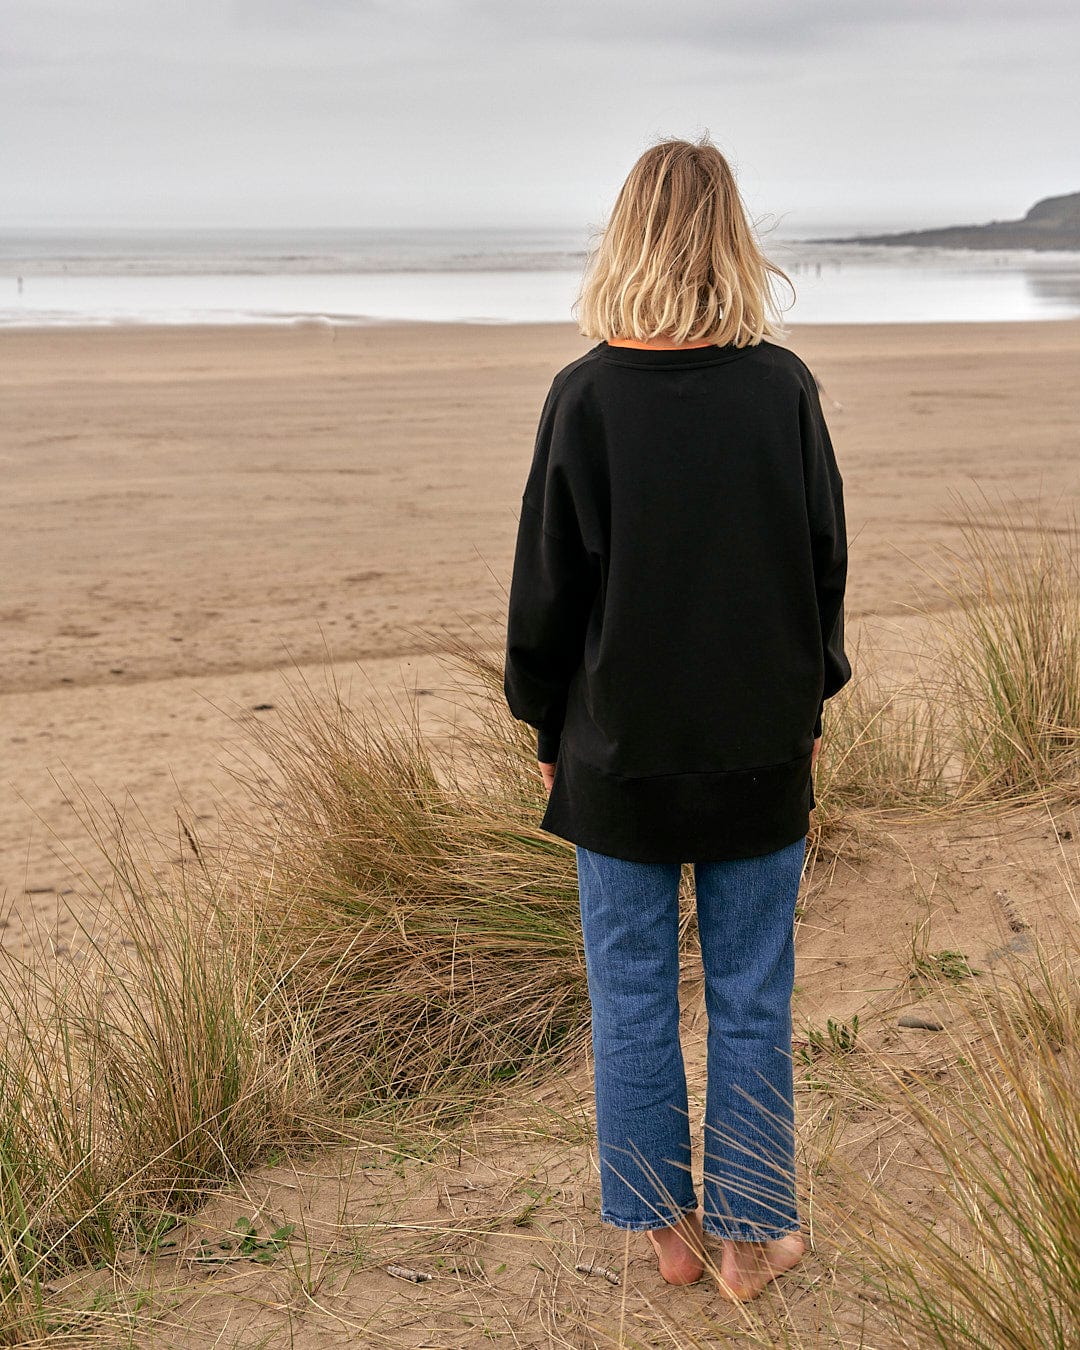 A woman standing on a beach looking at the ocean while wearing the Saltrock Purfect Wave Gradient - Womens Boyfriend Fit Sweat - Black.